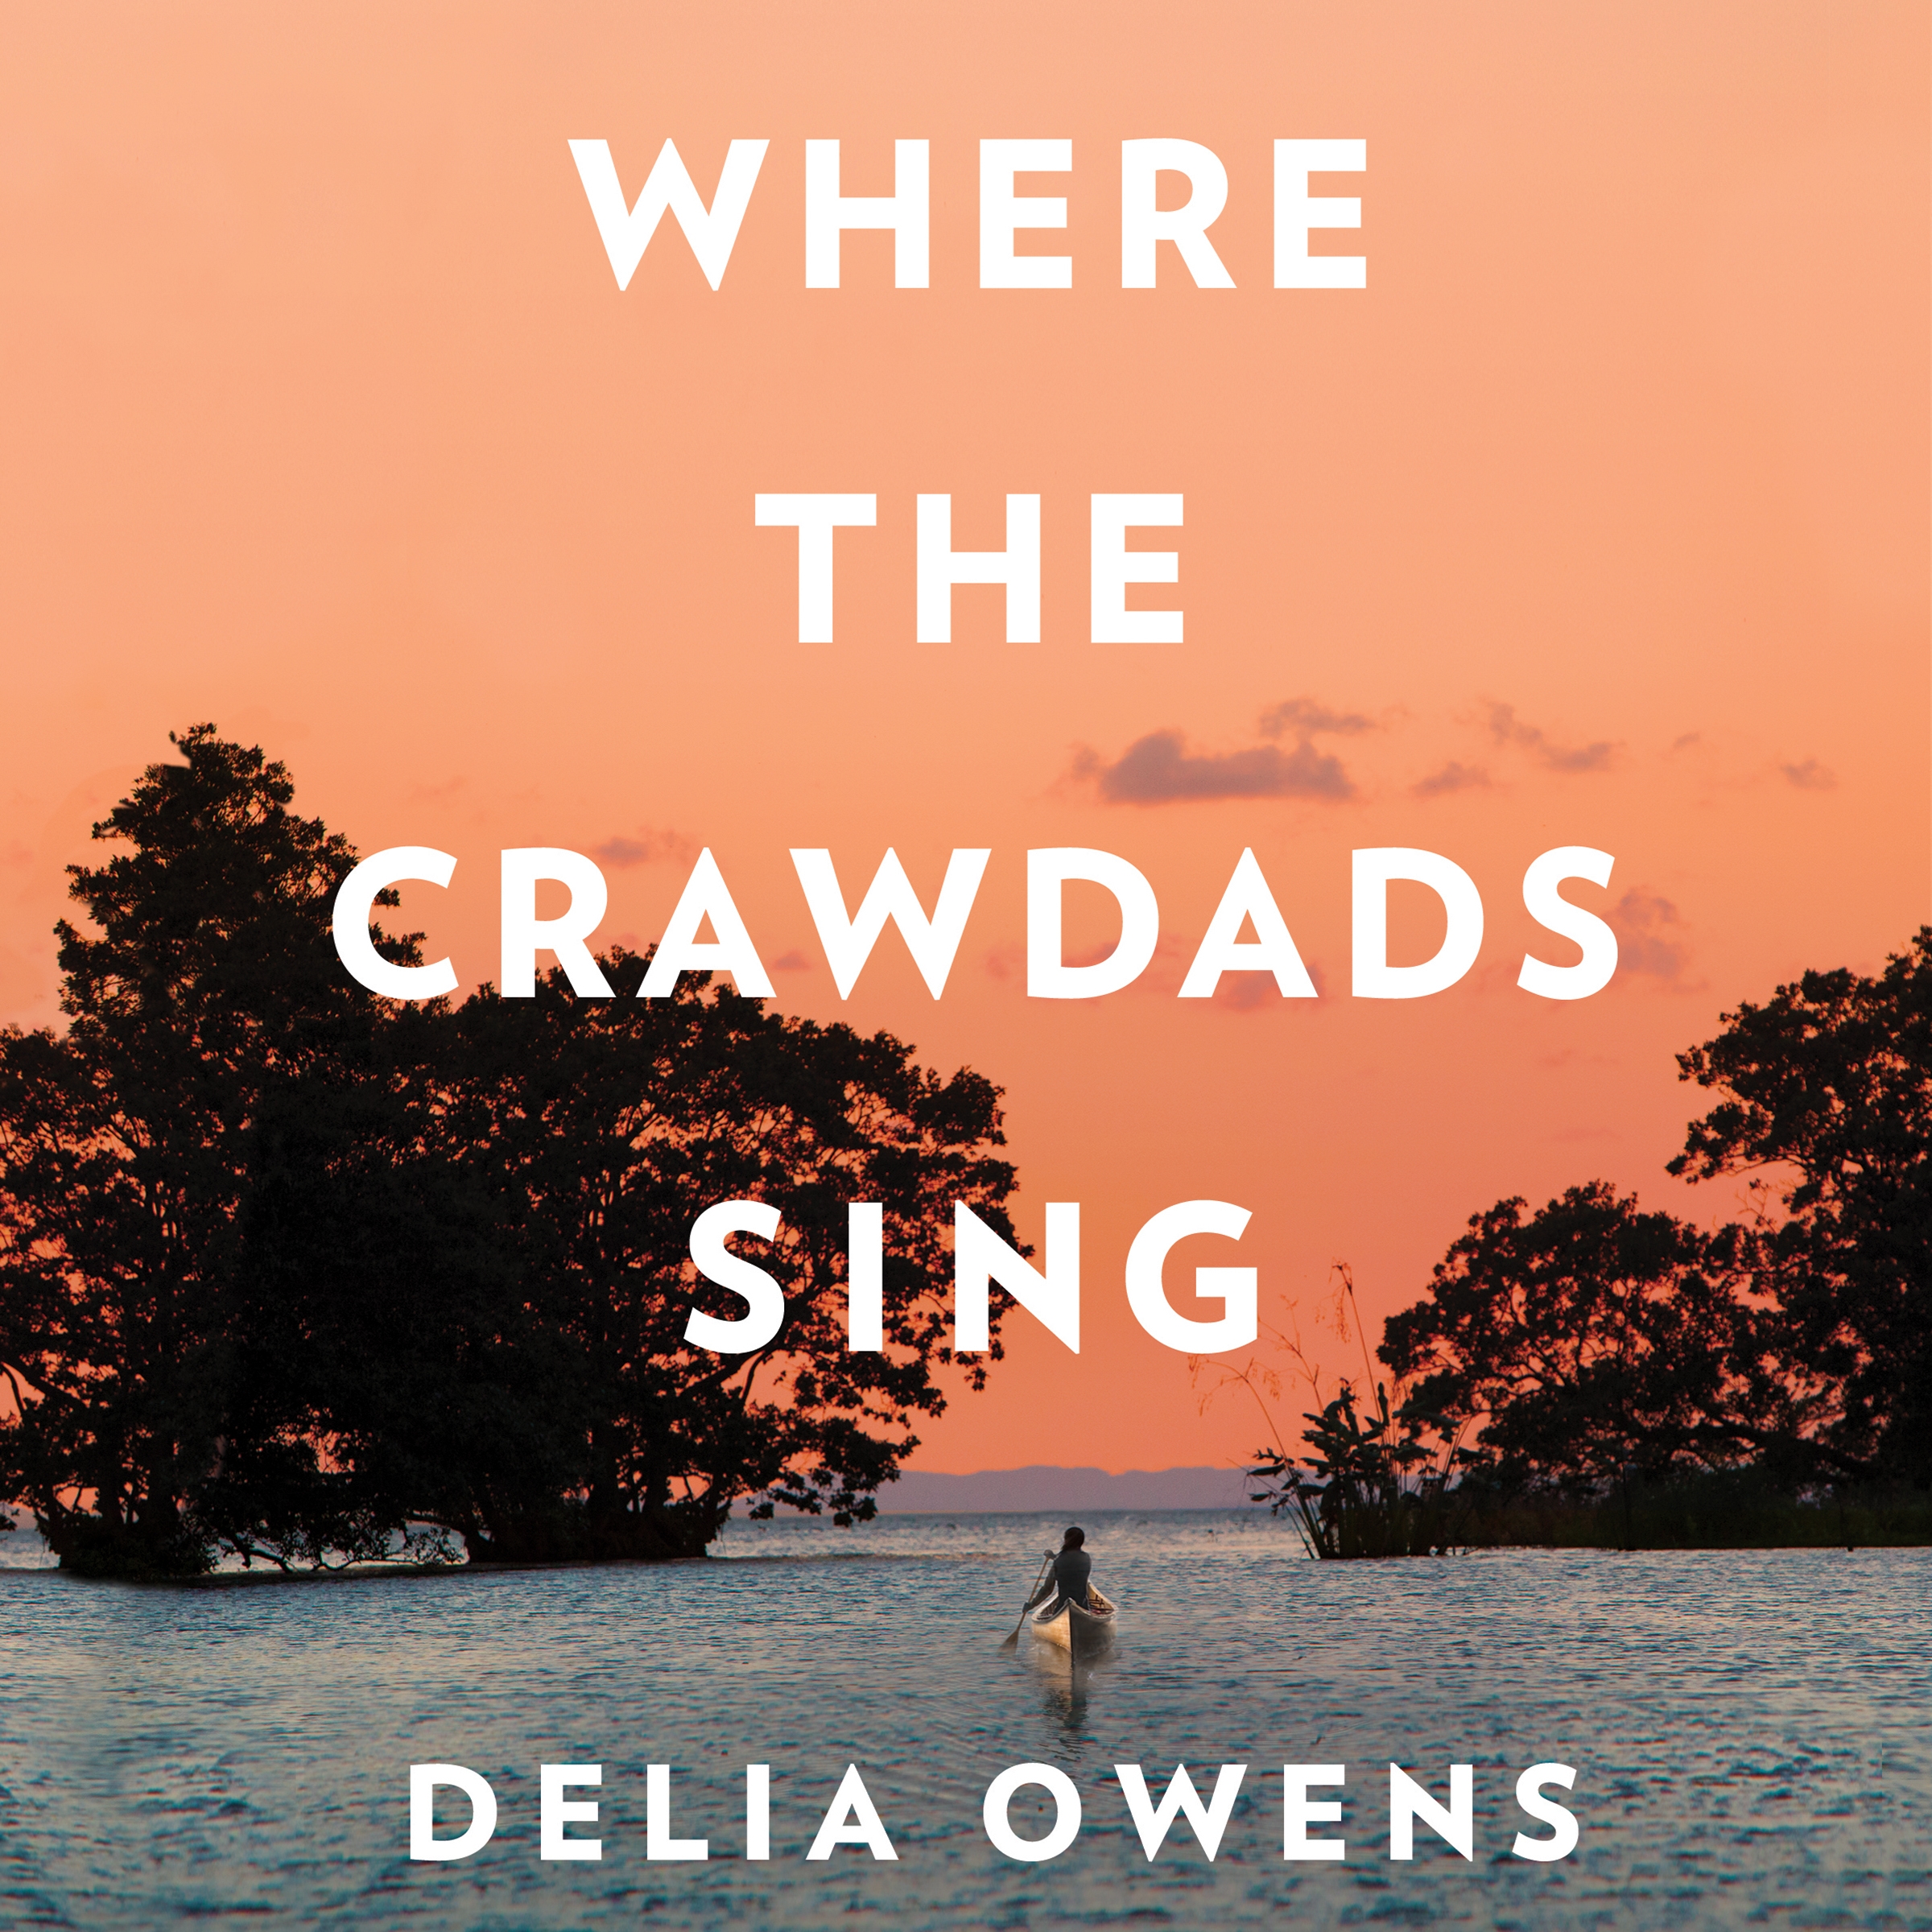 book review of where the crawdads sing